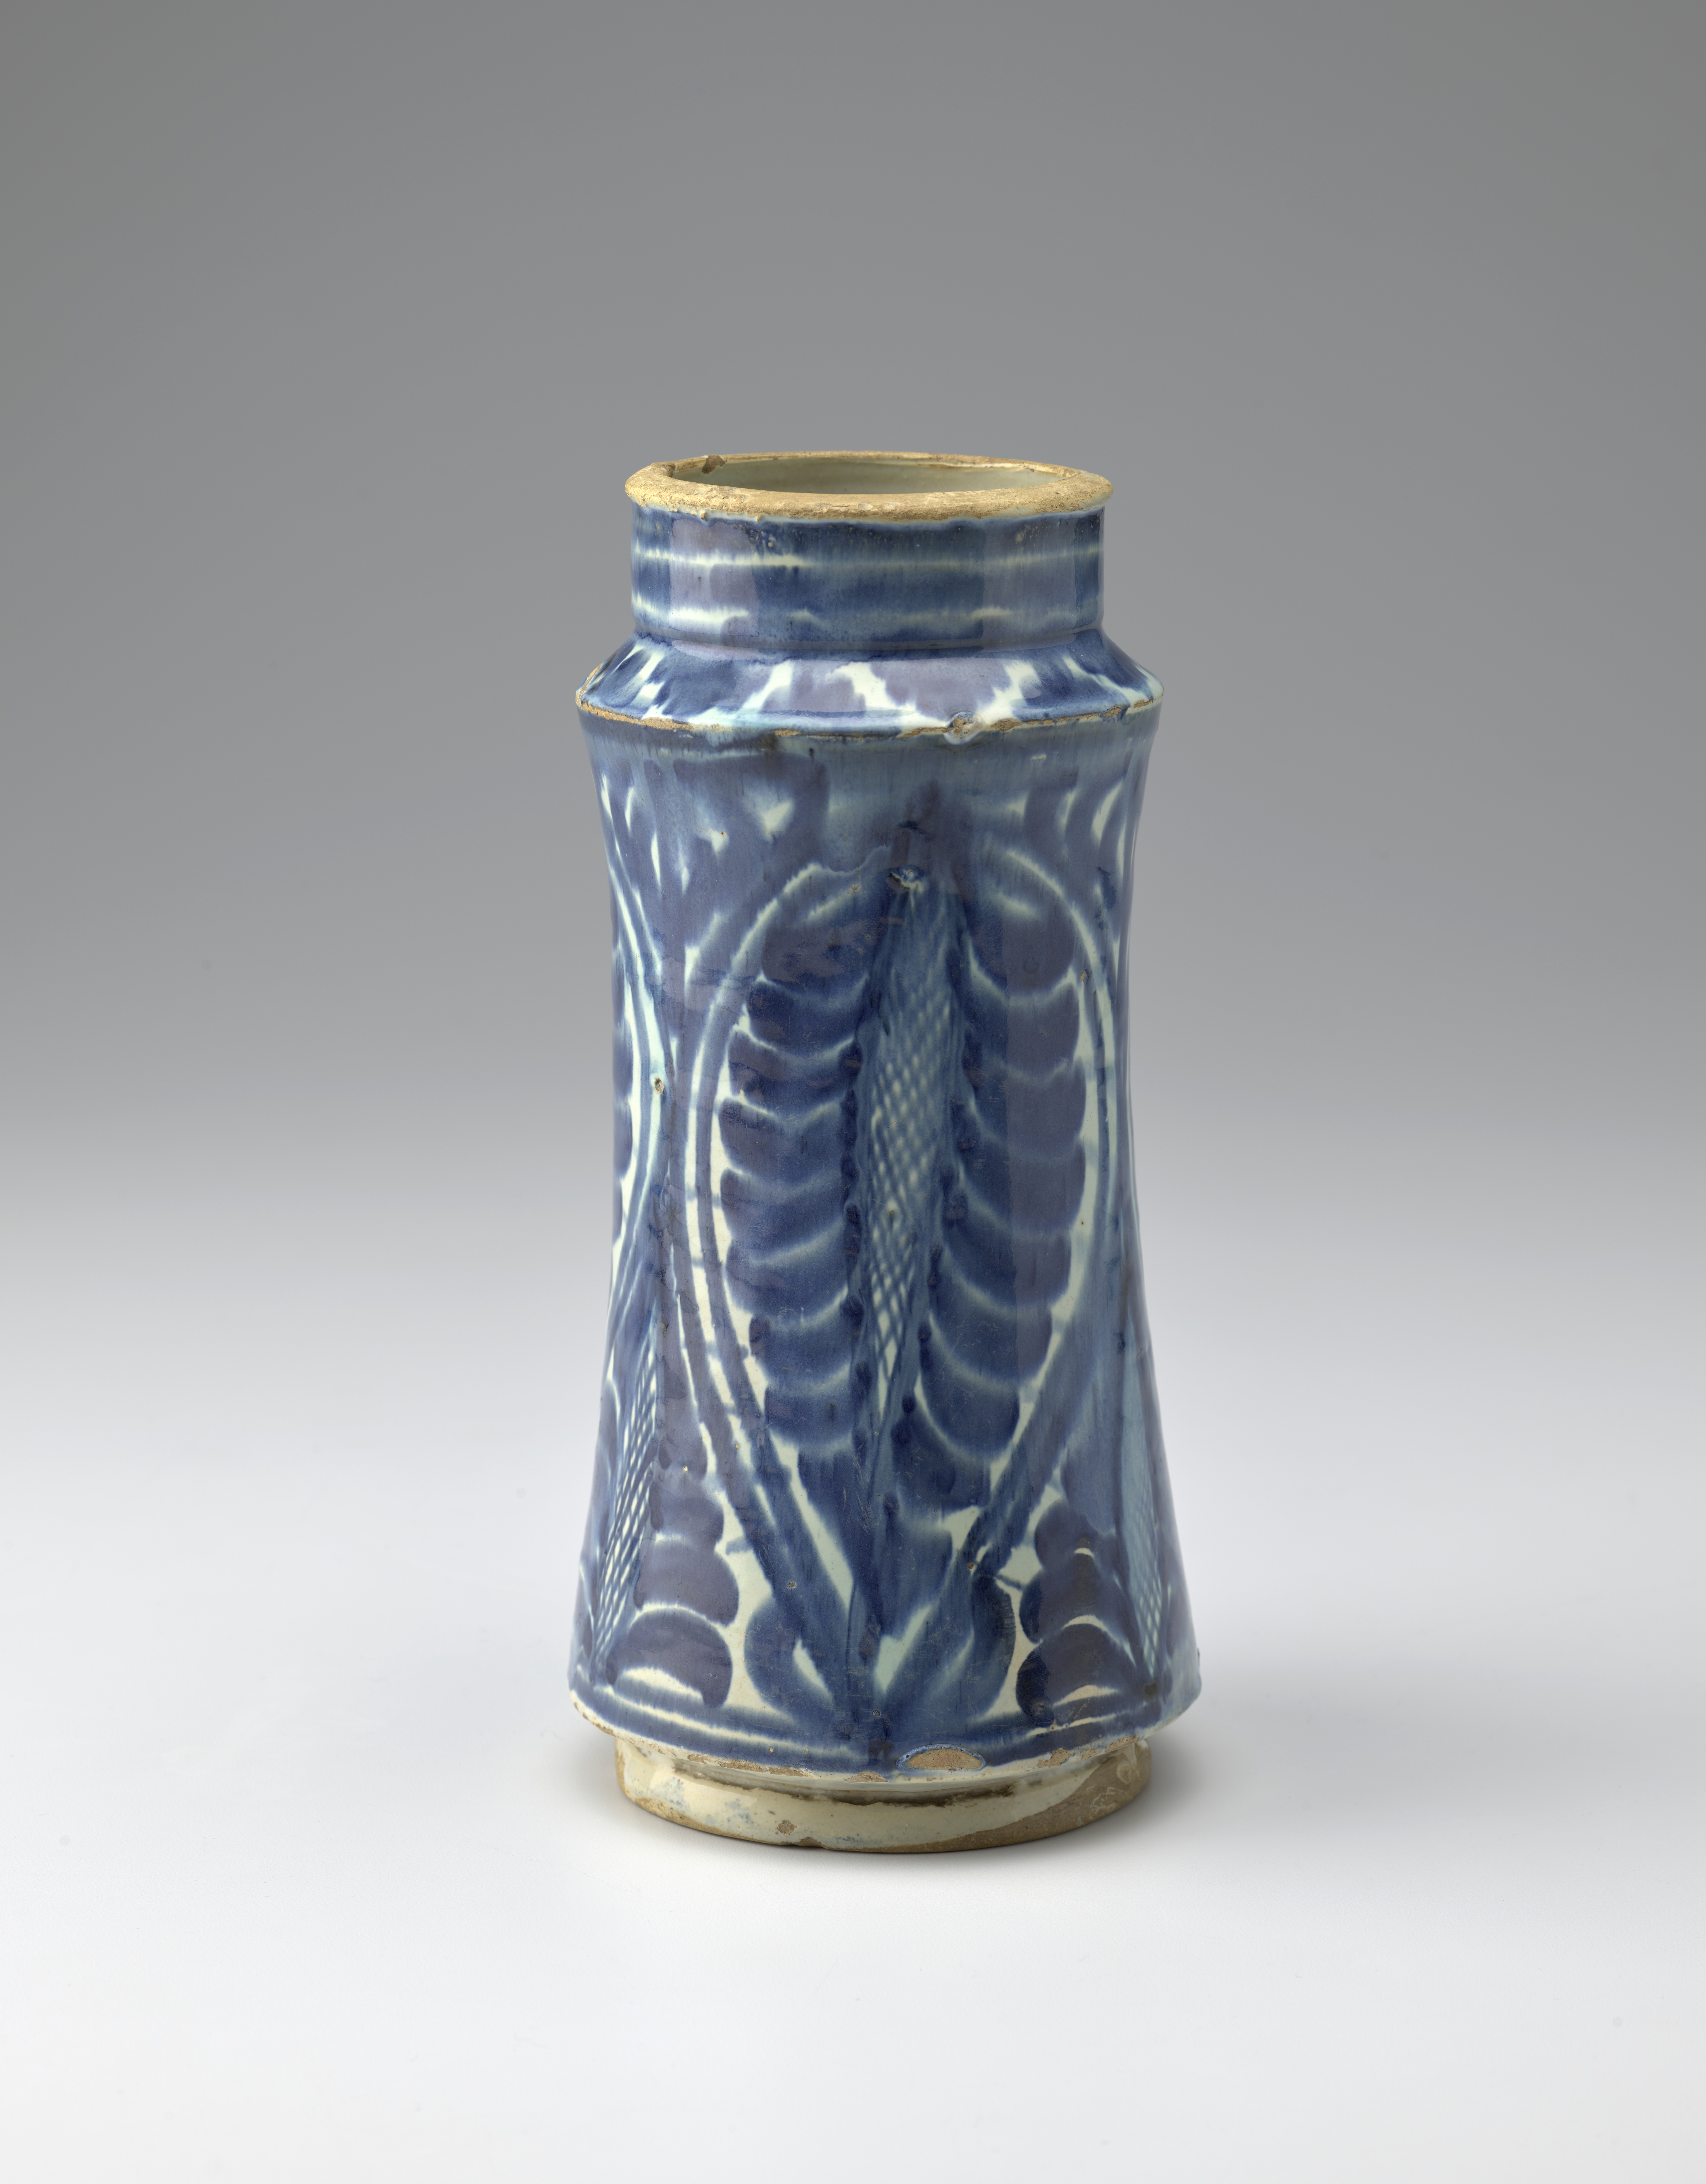 A blue and white pottery jar decorated with a palm branch design.